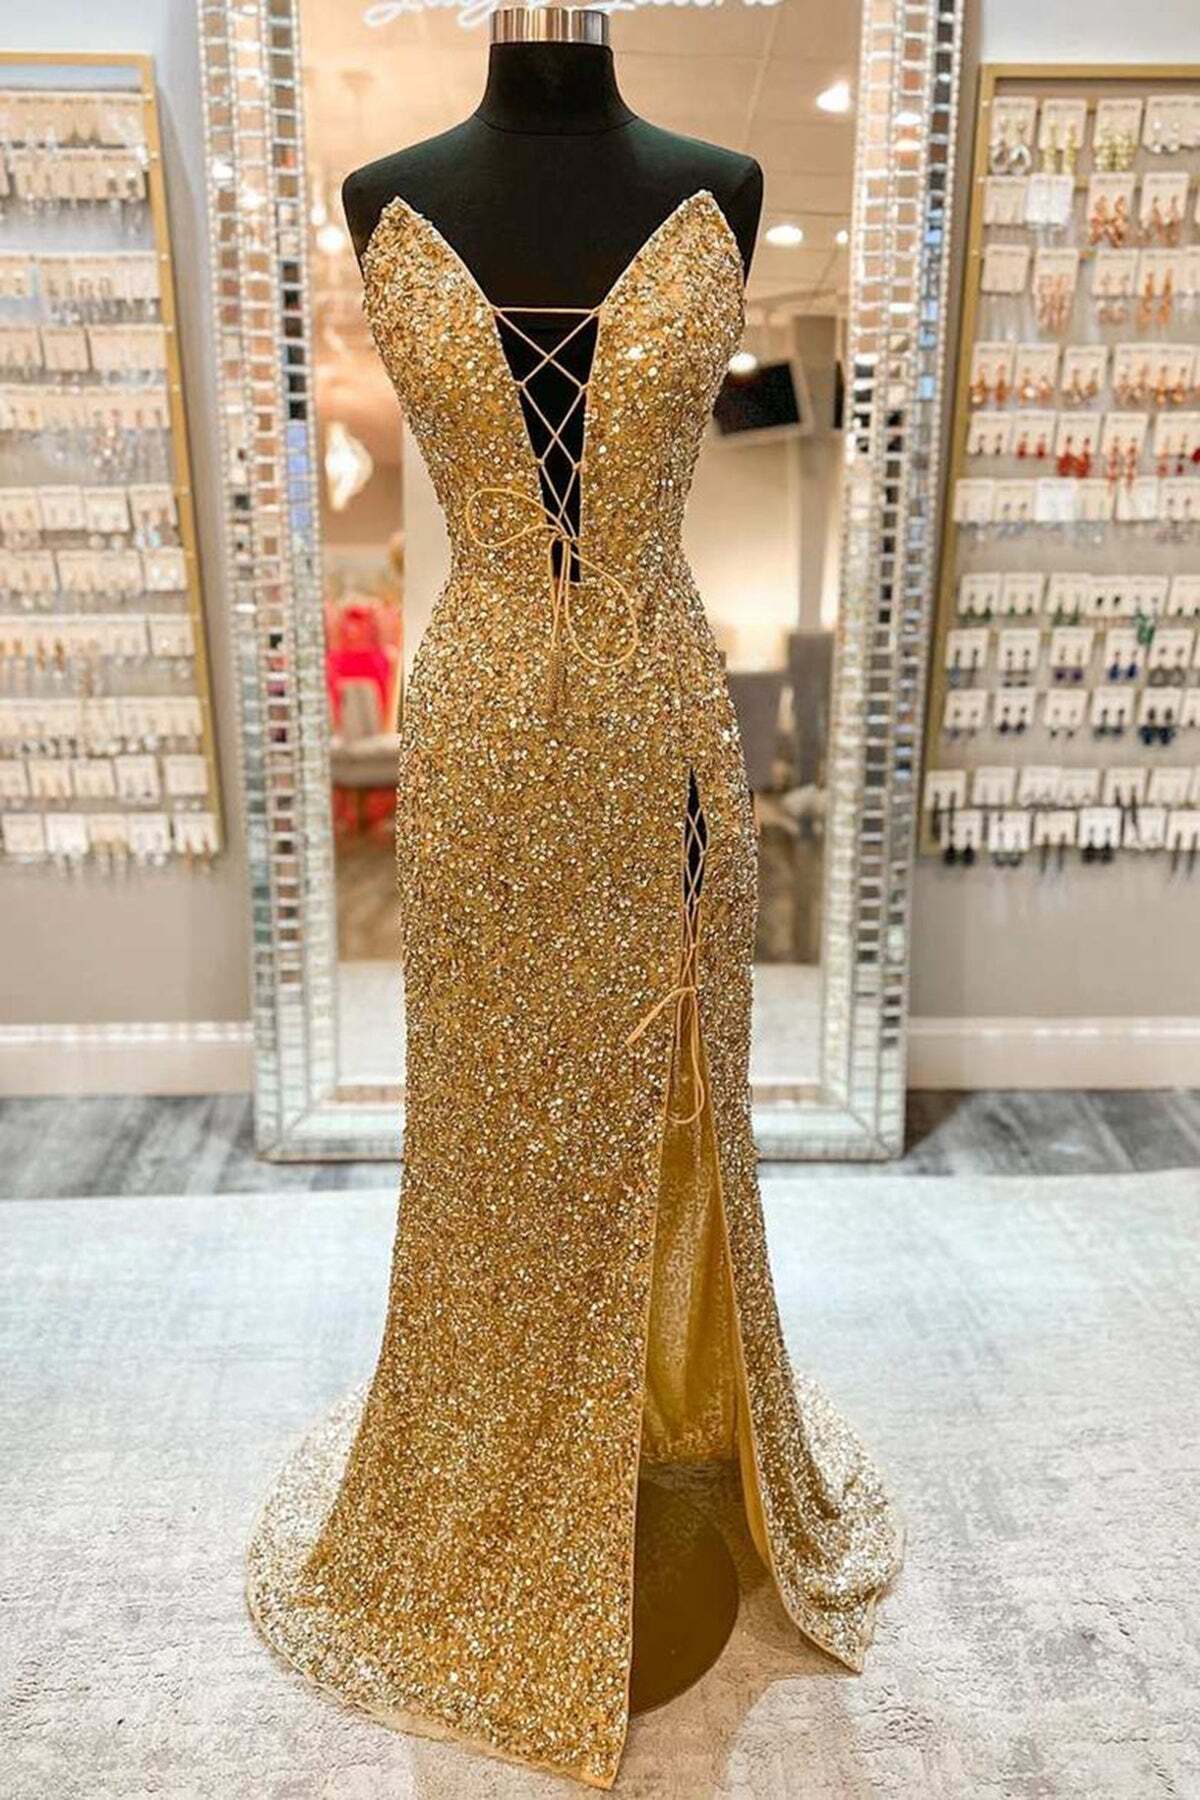 Homecoming Dresses Unique, V Neck Mermaid Golden Sequins Long Prom Dress with High Slit, Mermaid Golden Formal Dress, Gold Sequins Evening Dress